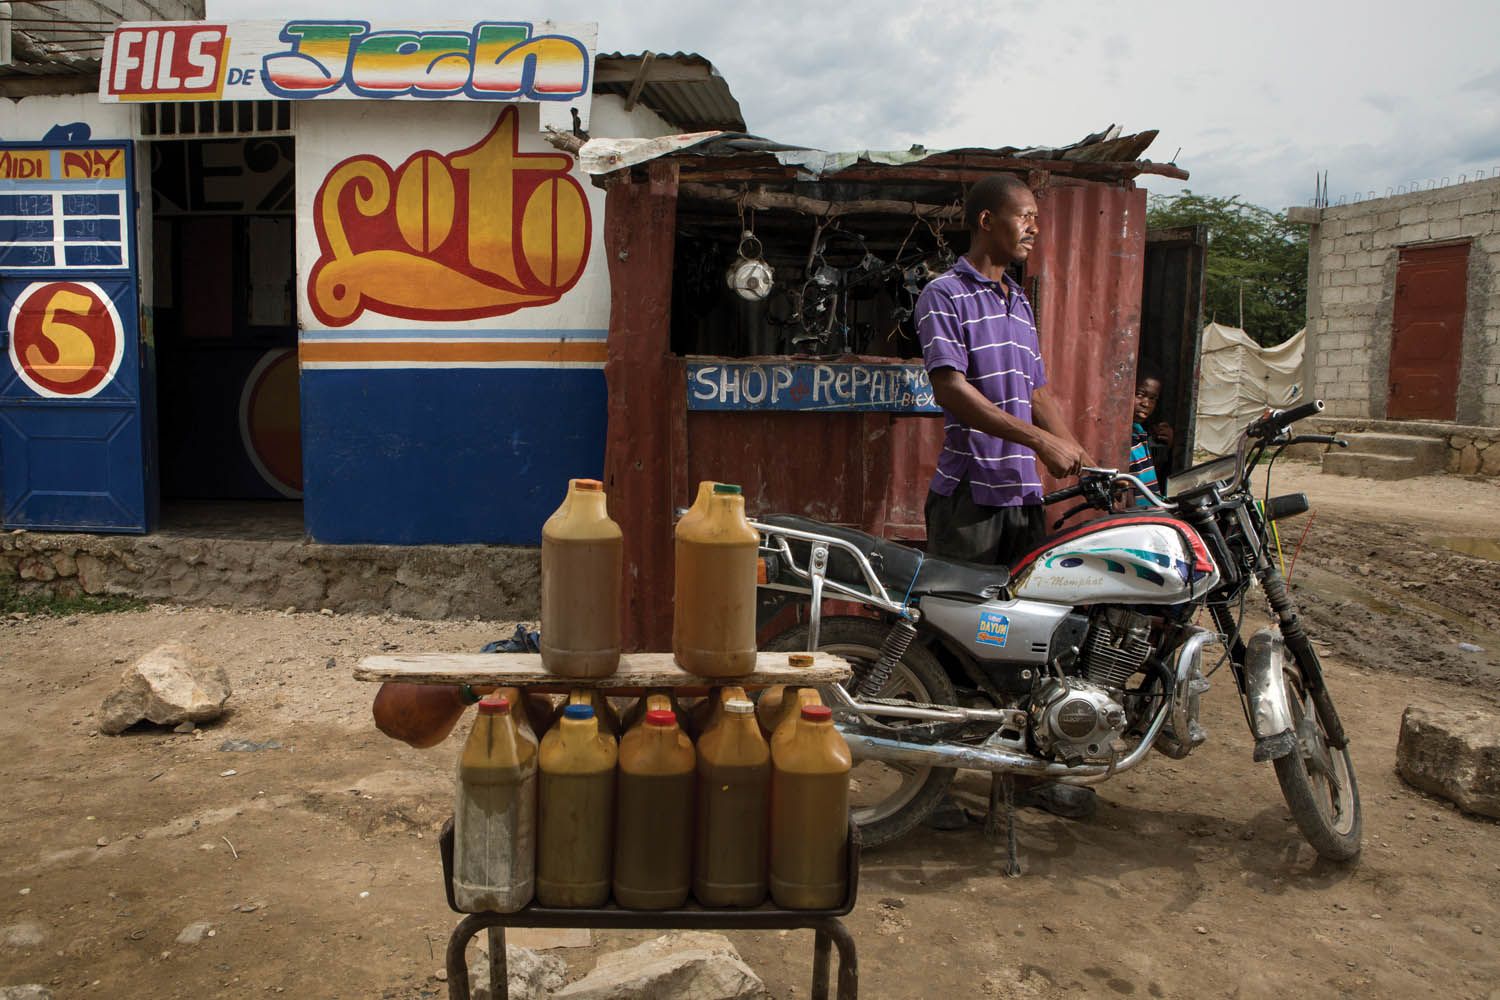 Jacob Viknel at his motorcycle-repair shop in the Jerusalem section of Canaan. When customers pull up, Viknel fills their tanks with gasoline from the jugs on display. Image by Allison Shelley. Haiti, 2017.